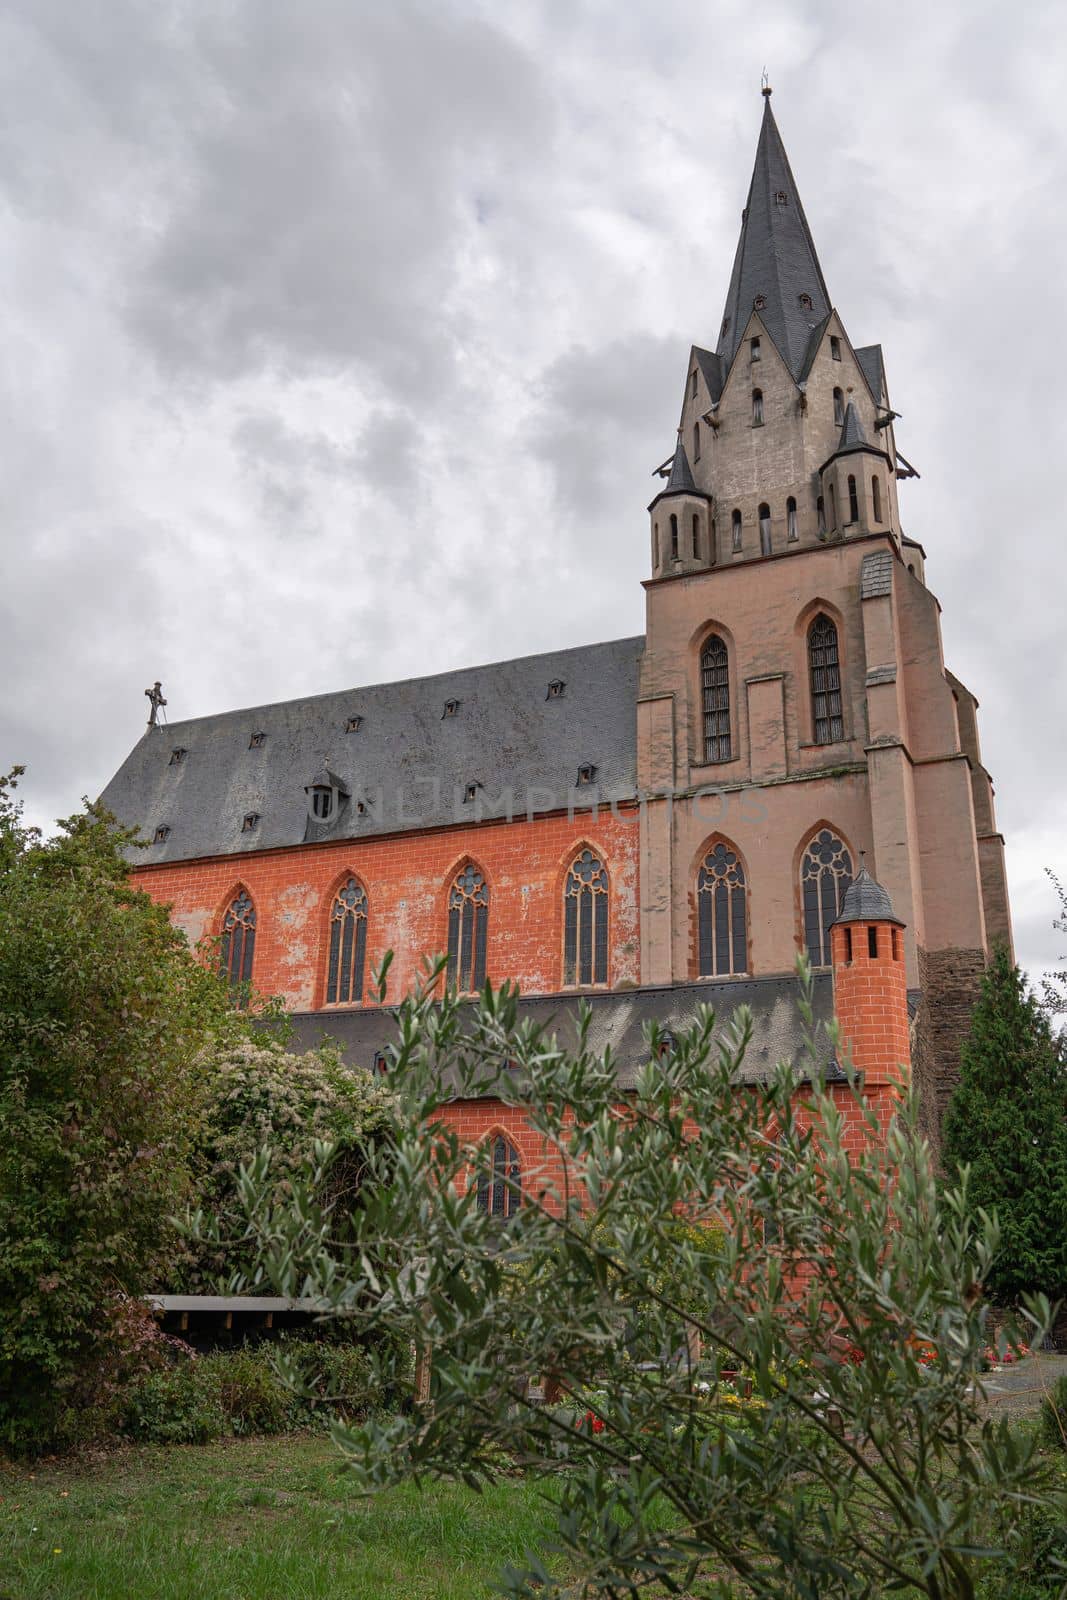 Abbey church of Oberwesel against cloudy sky, Rhine Valley, Germany